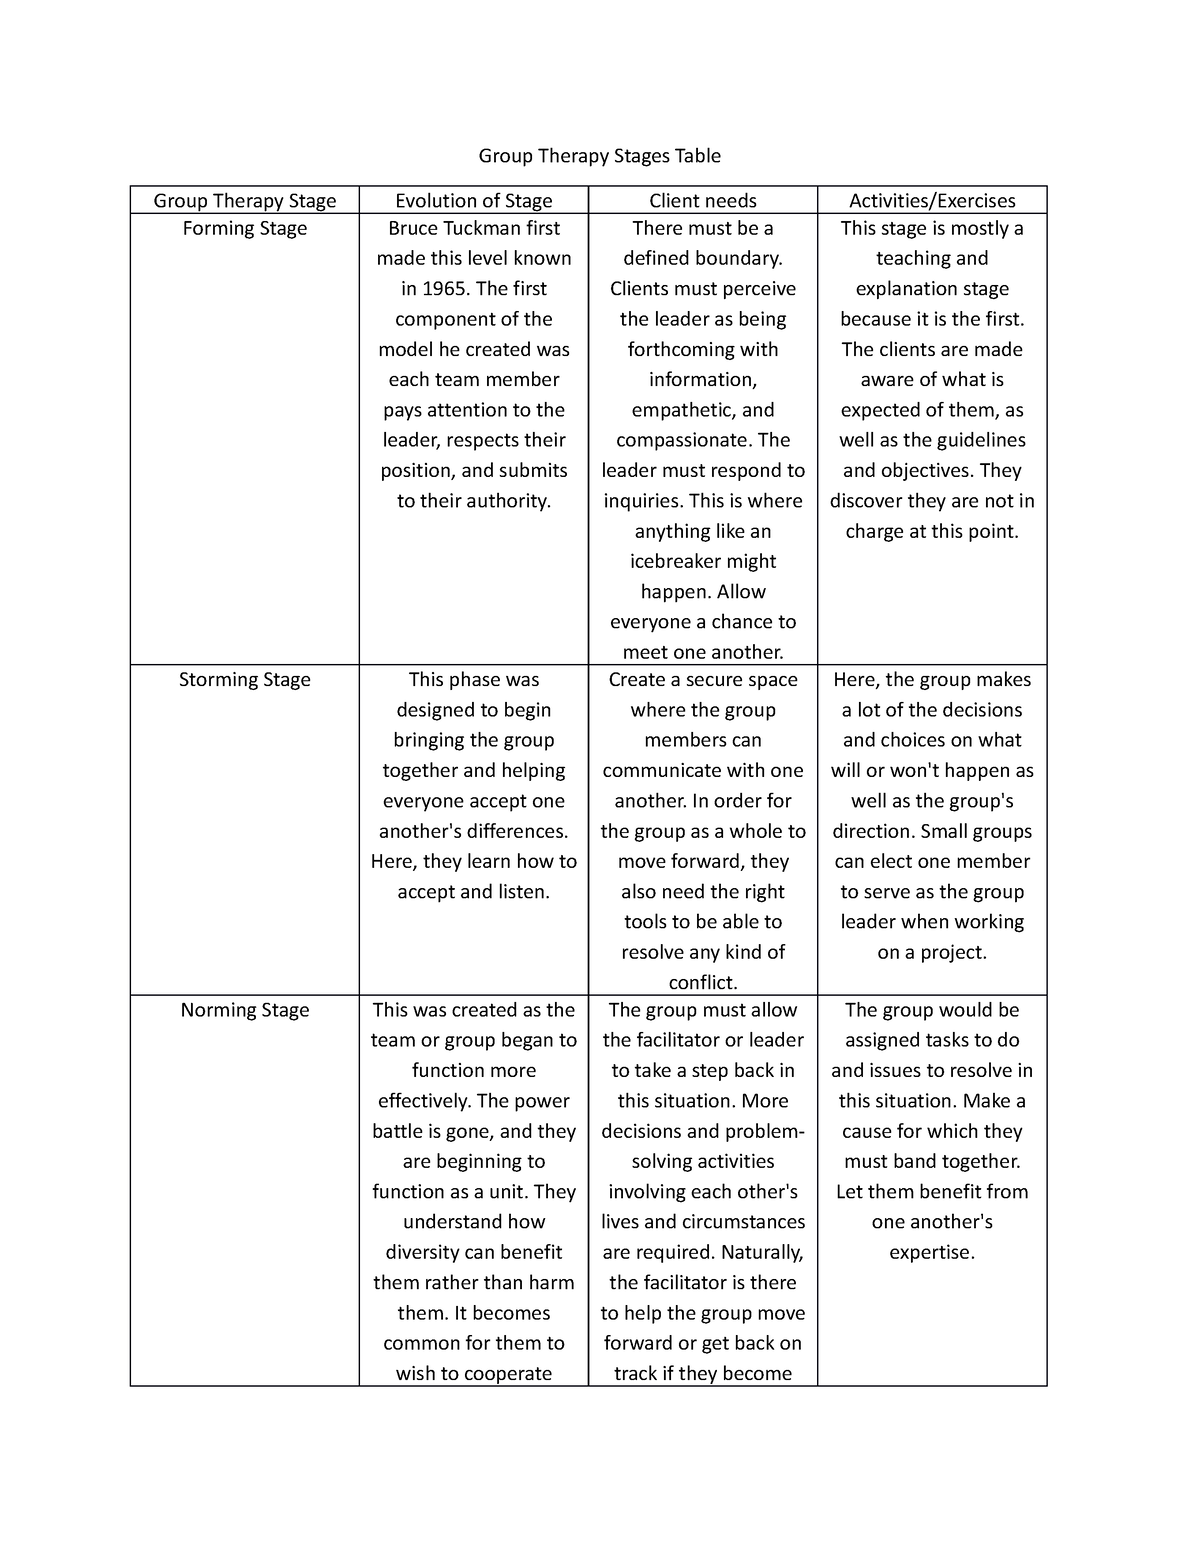 Group therapy stages - Topic 2 - Group Therapy Stages Table Group ...